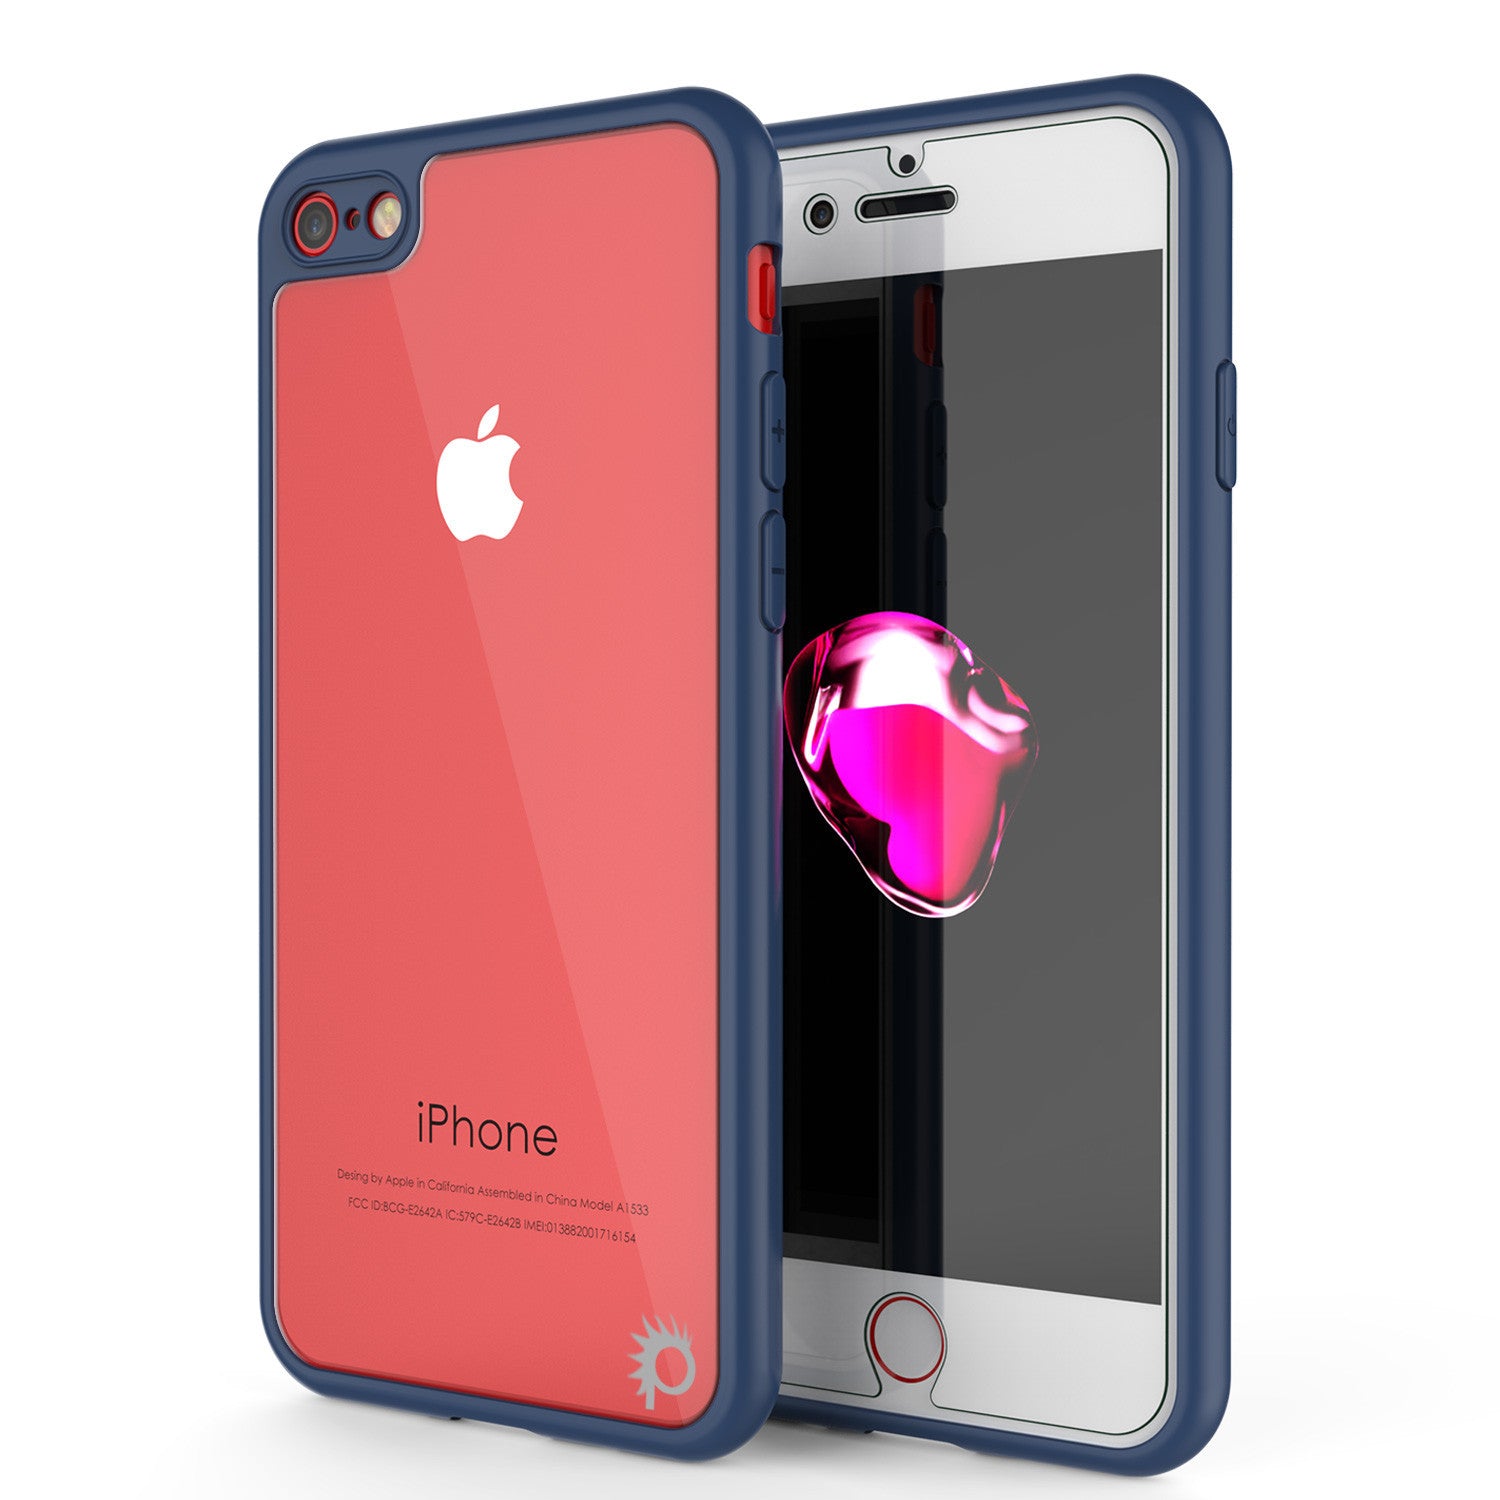 iPhone 7 Case, Punkcase [MASK Series] [NAVY] Full Body Hybrid Dual Layer TPU Cover protective Tempered Glass Screen Protector